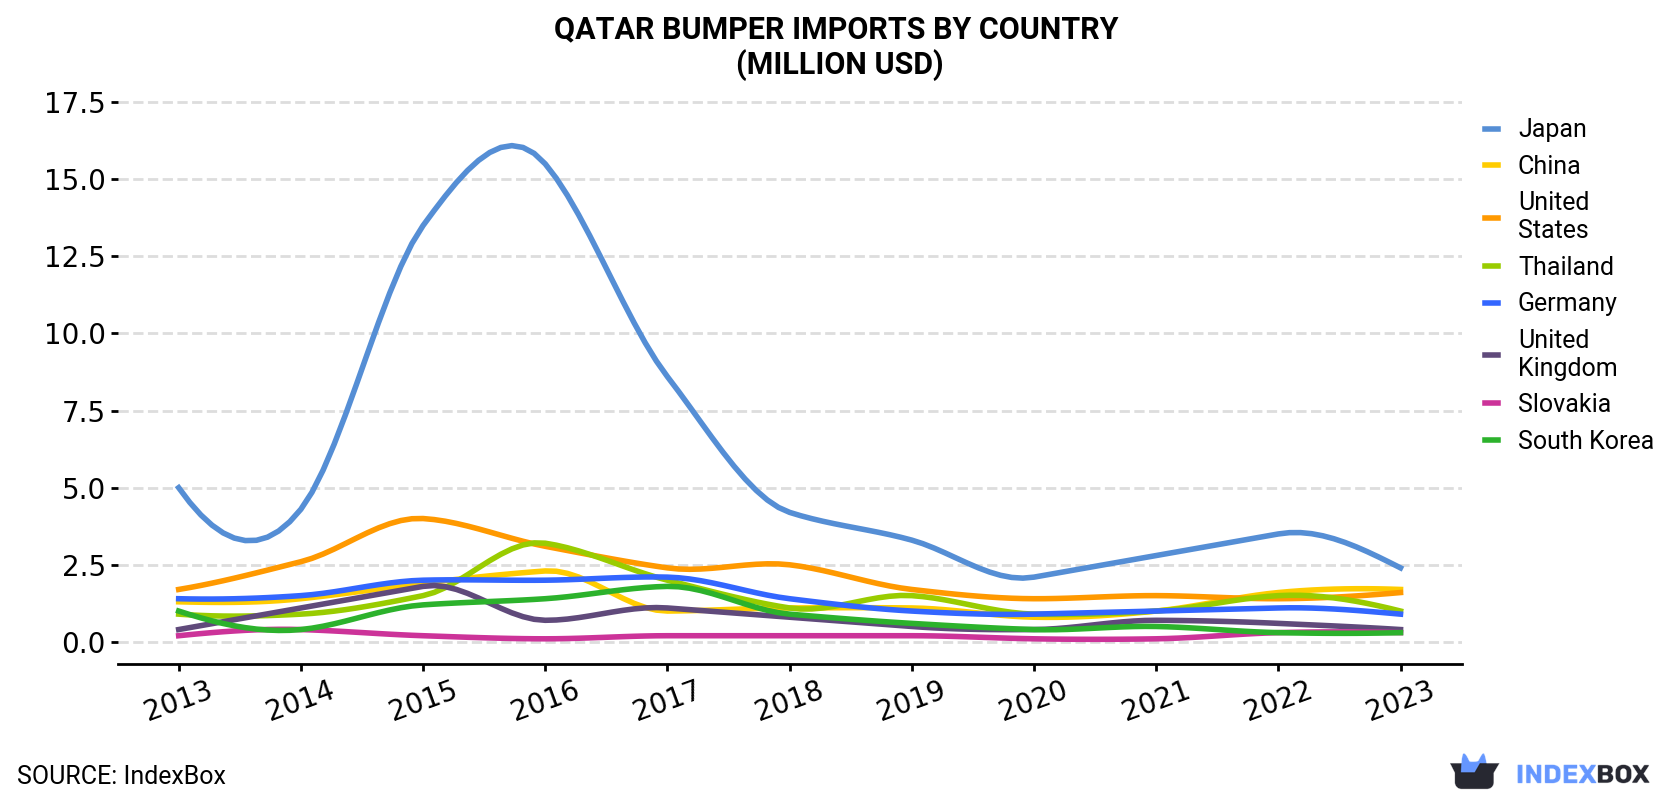 Qatar Bumper Imports By Country (Million USD)